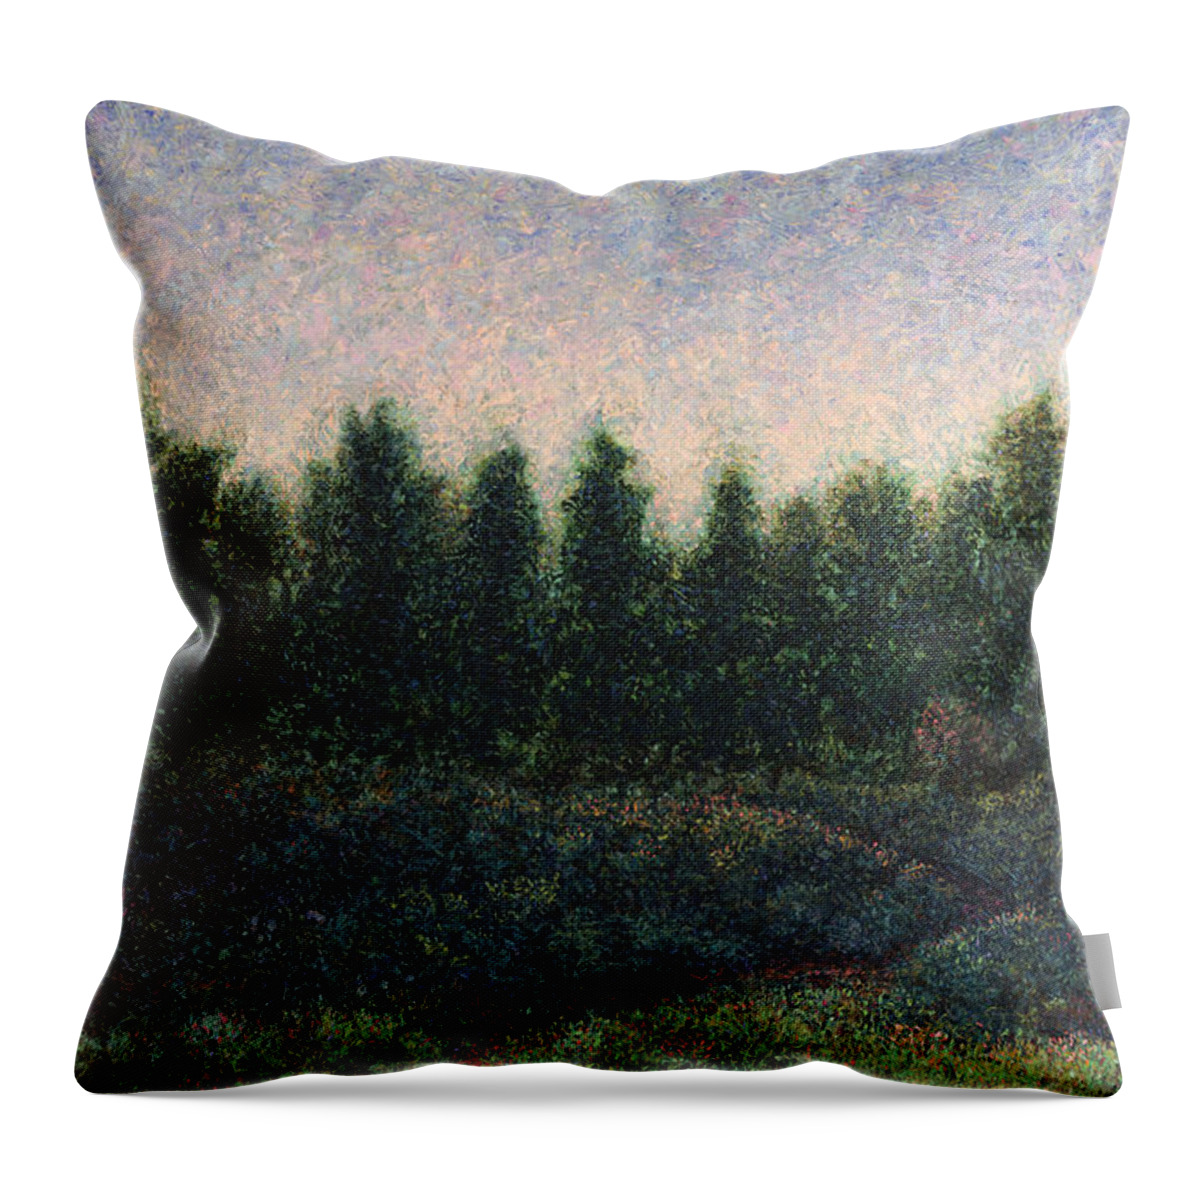 River Throw Pillow featuring the painting Looking Back by James W Johnson